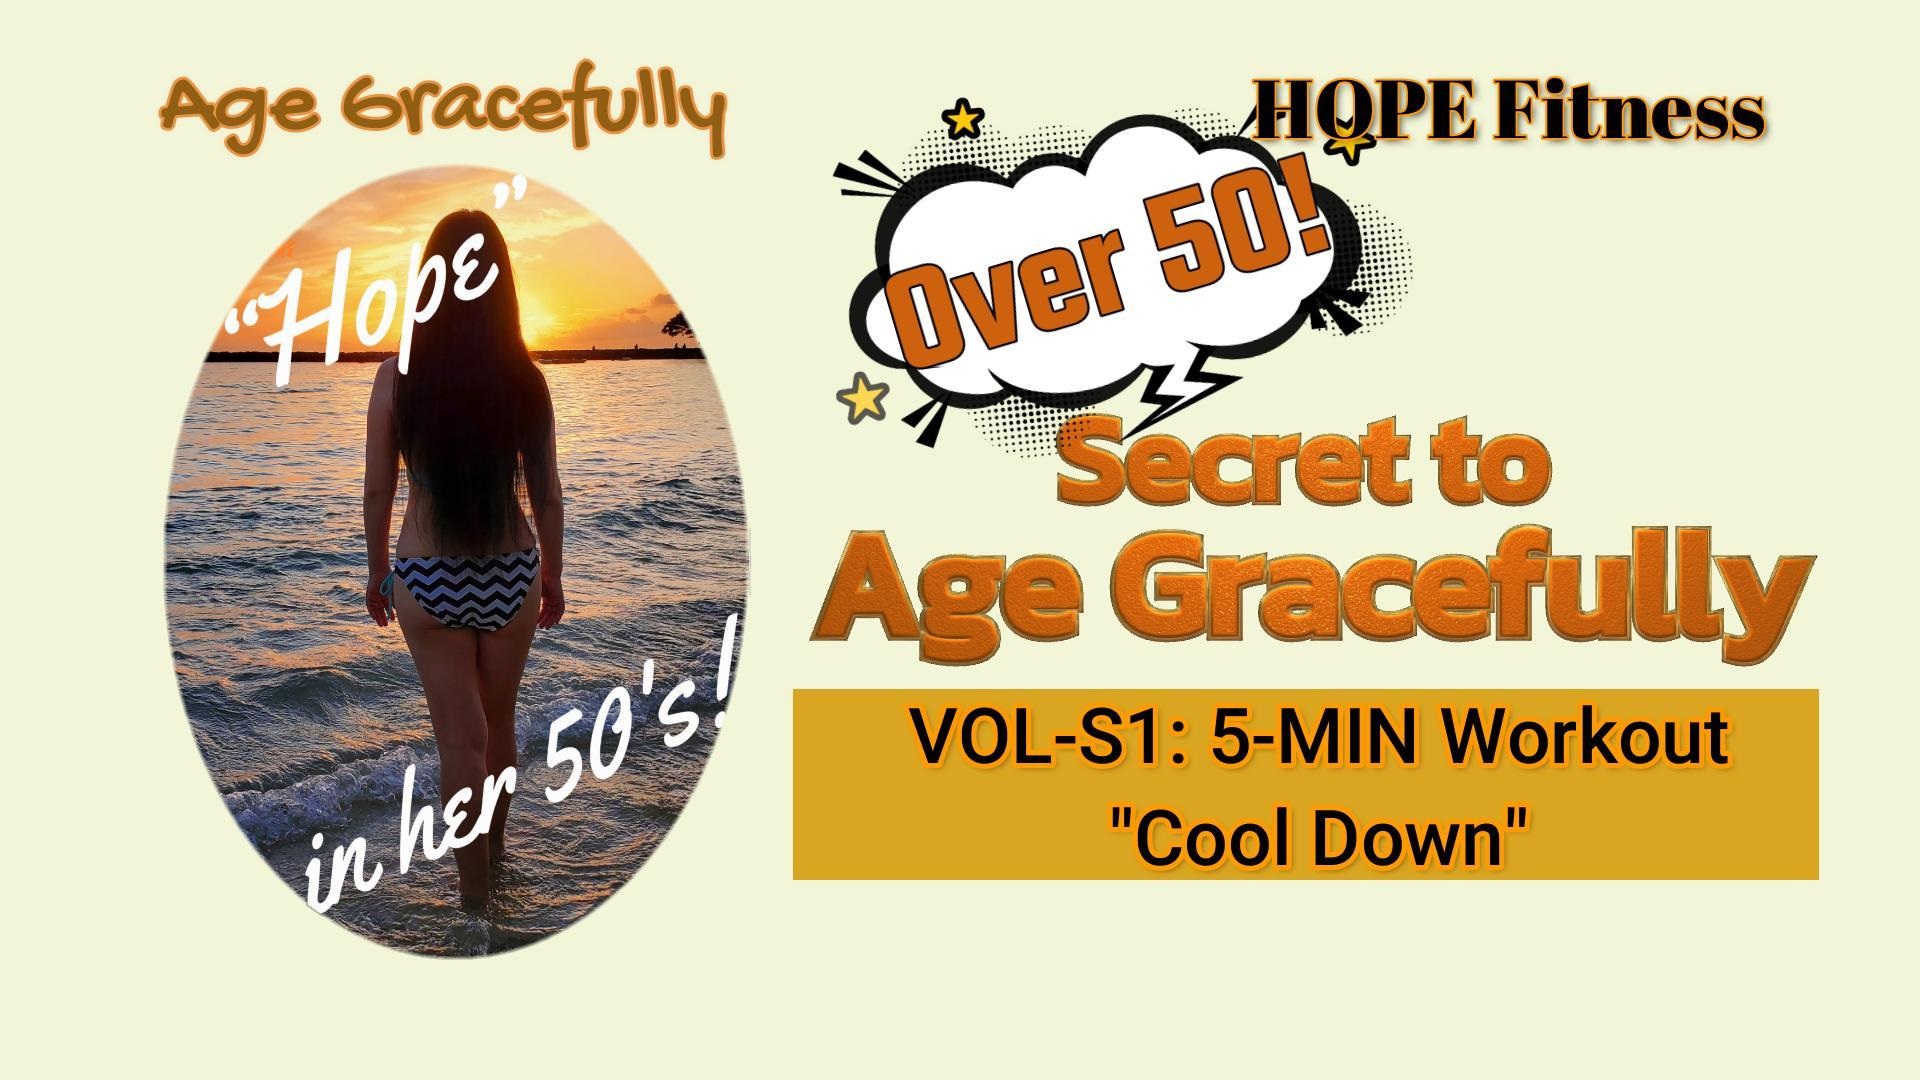 5-min cool down home workout by Age Gracefully -- Hope Fitness